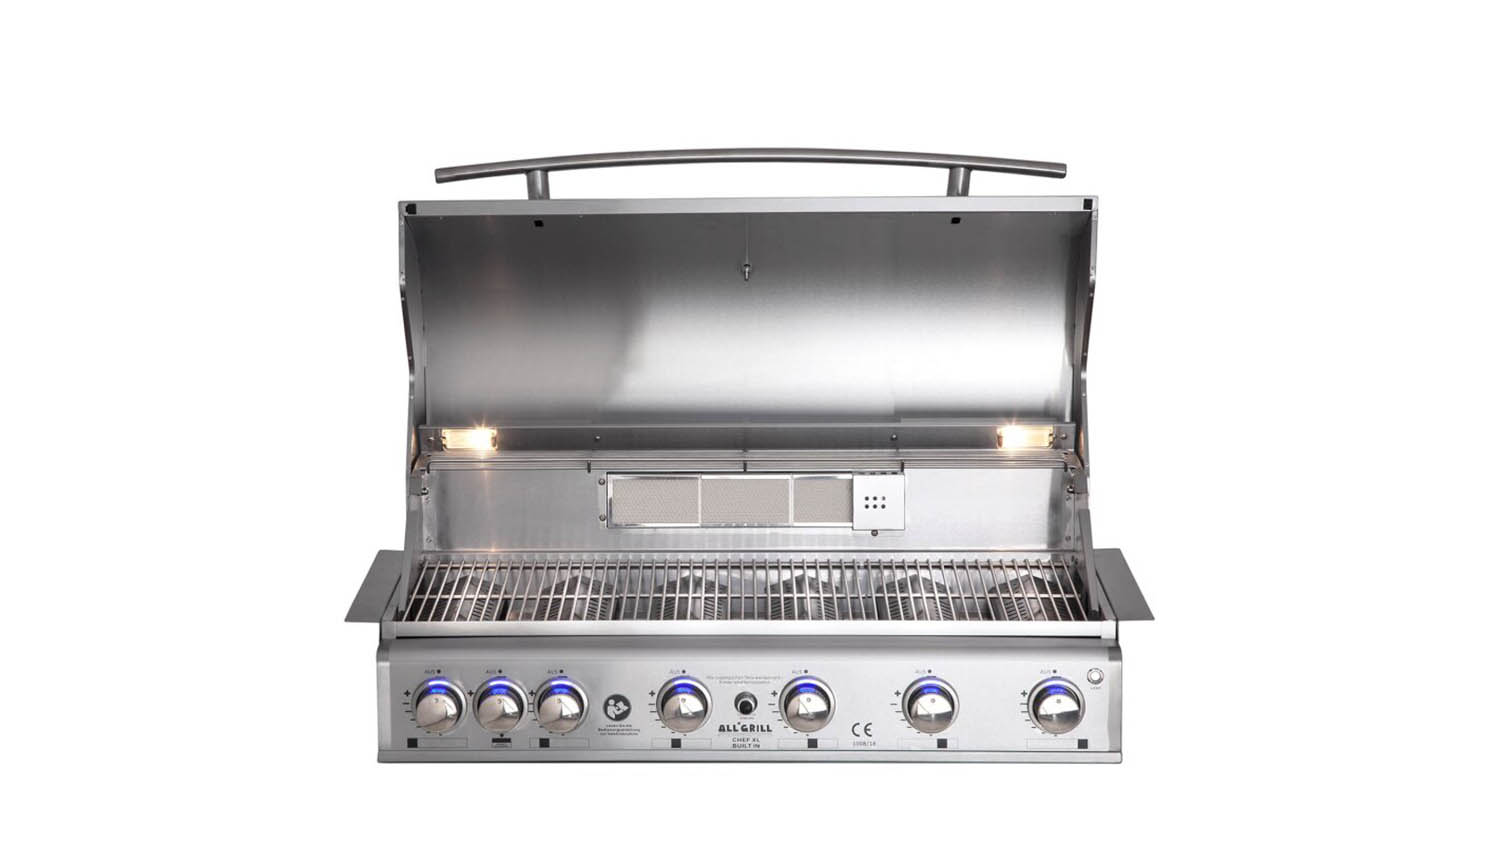 Top Line Allgrill Chef Xl Built In Mit Air System 2